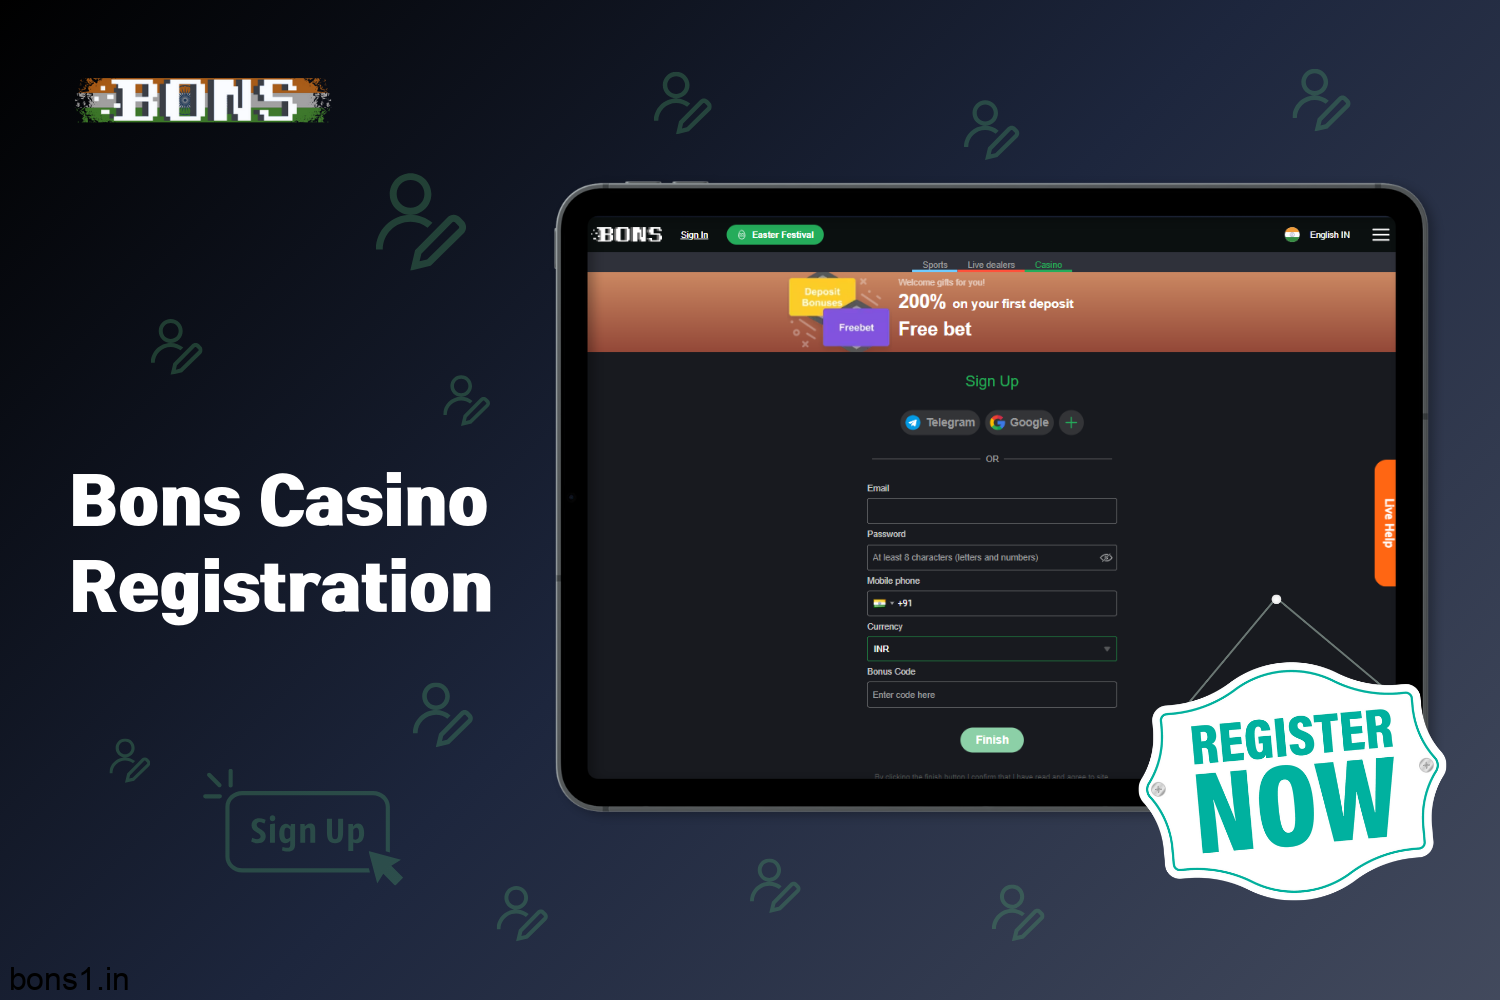 To access all the benefits of Casino Bons, users in India need to register